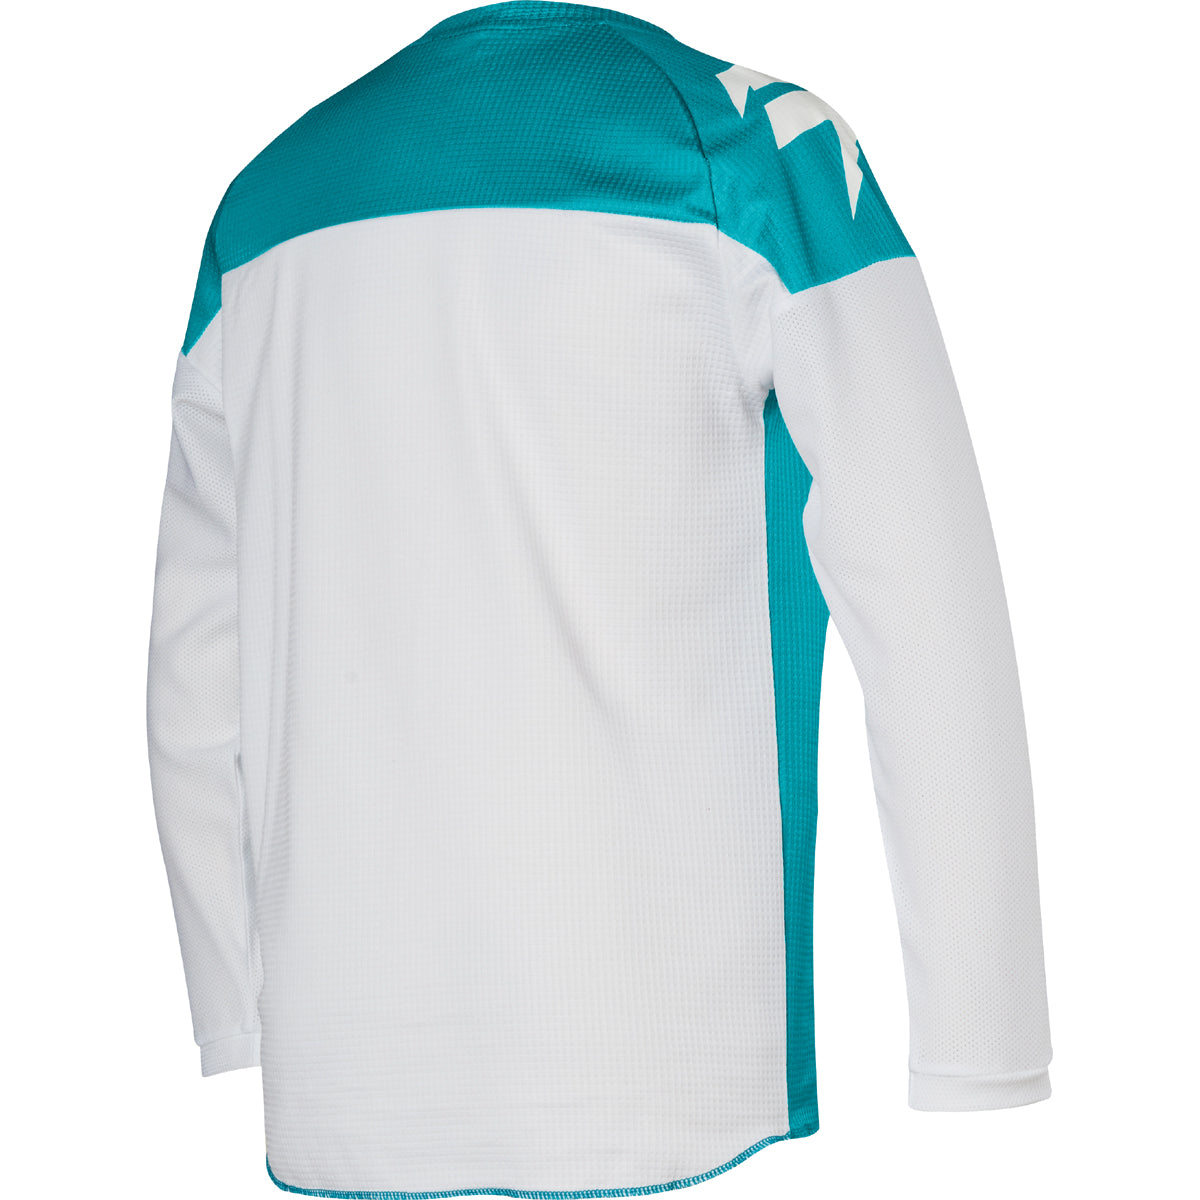 Youth Whit3 Race Jersey 1 Green